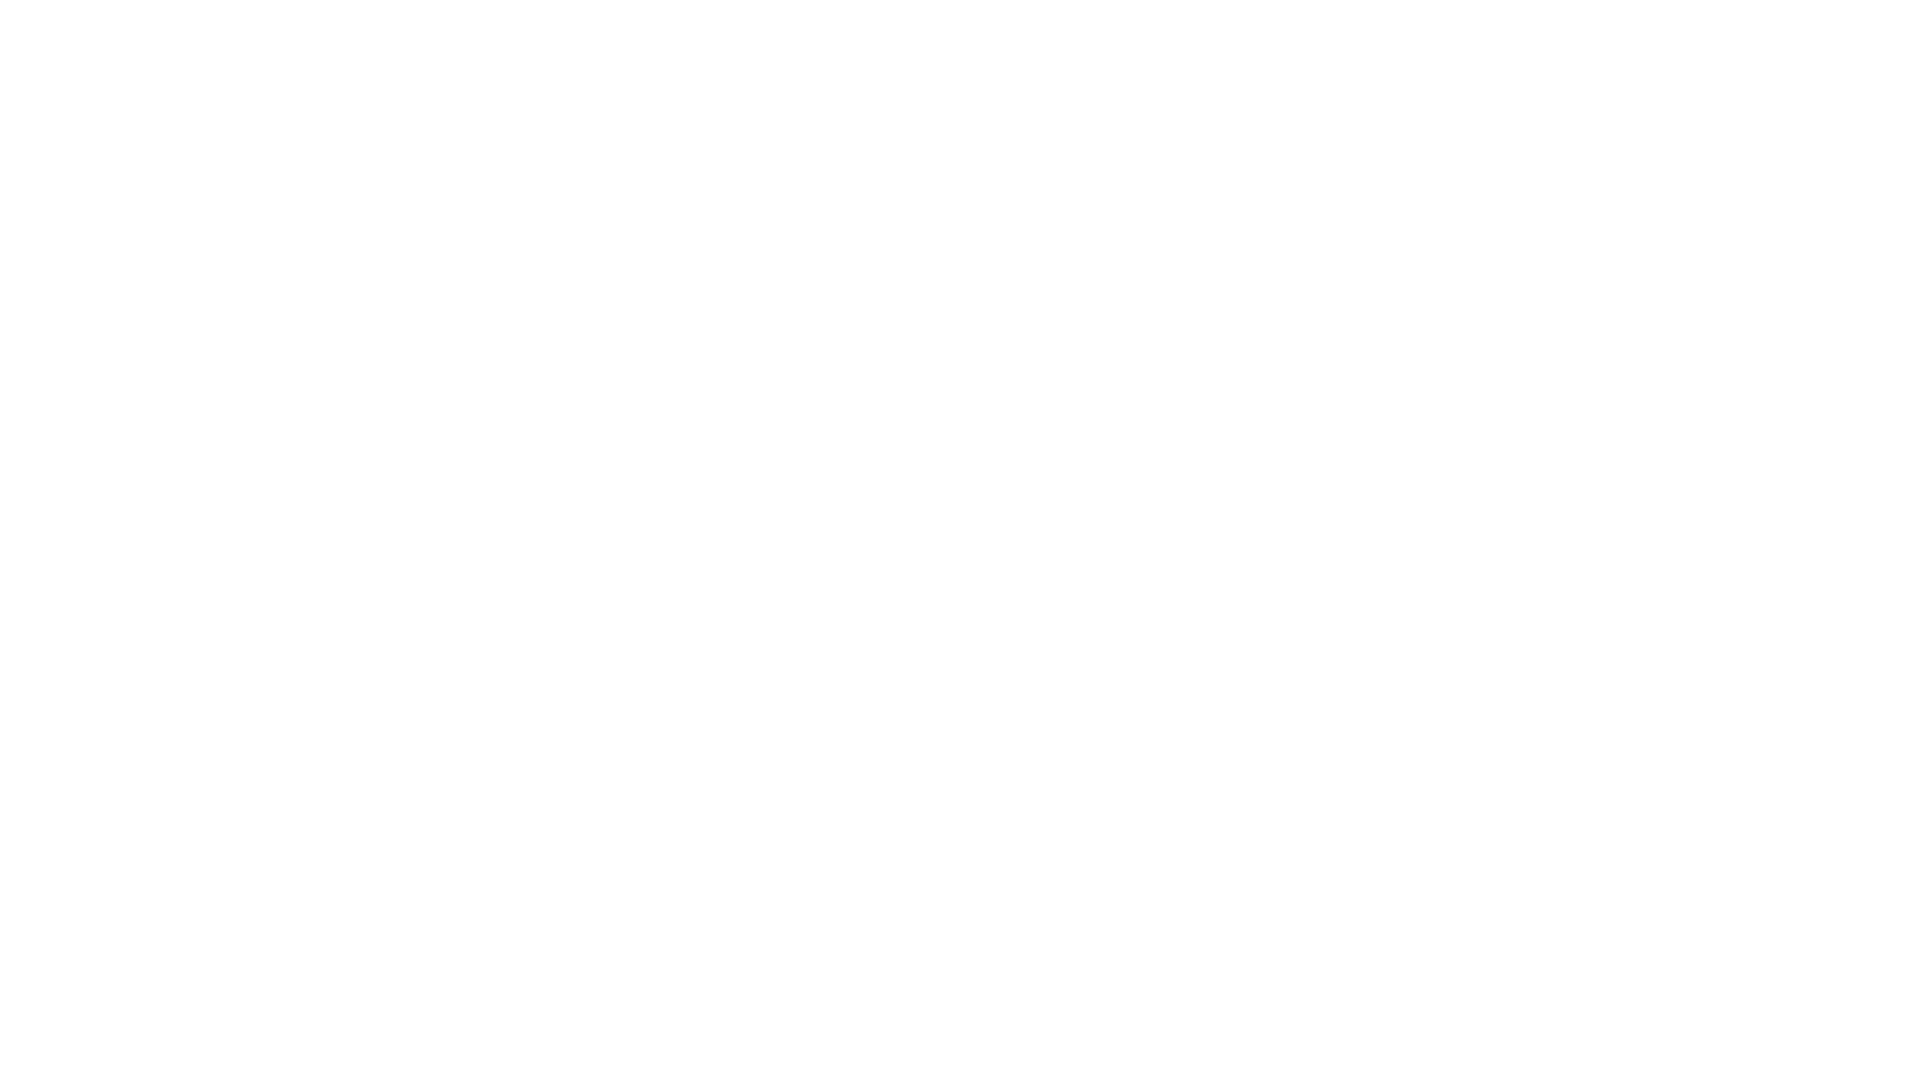 A graphic with text which says 1,320+